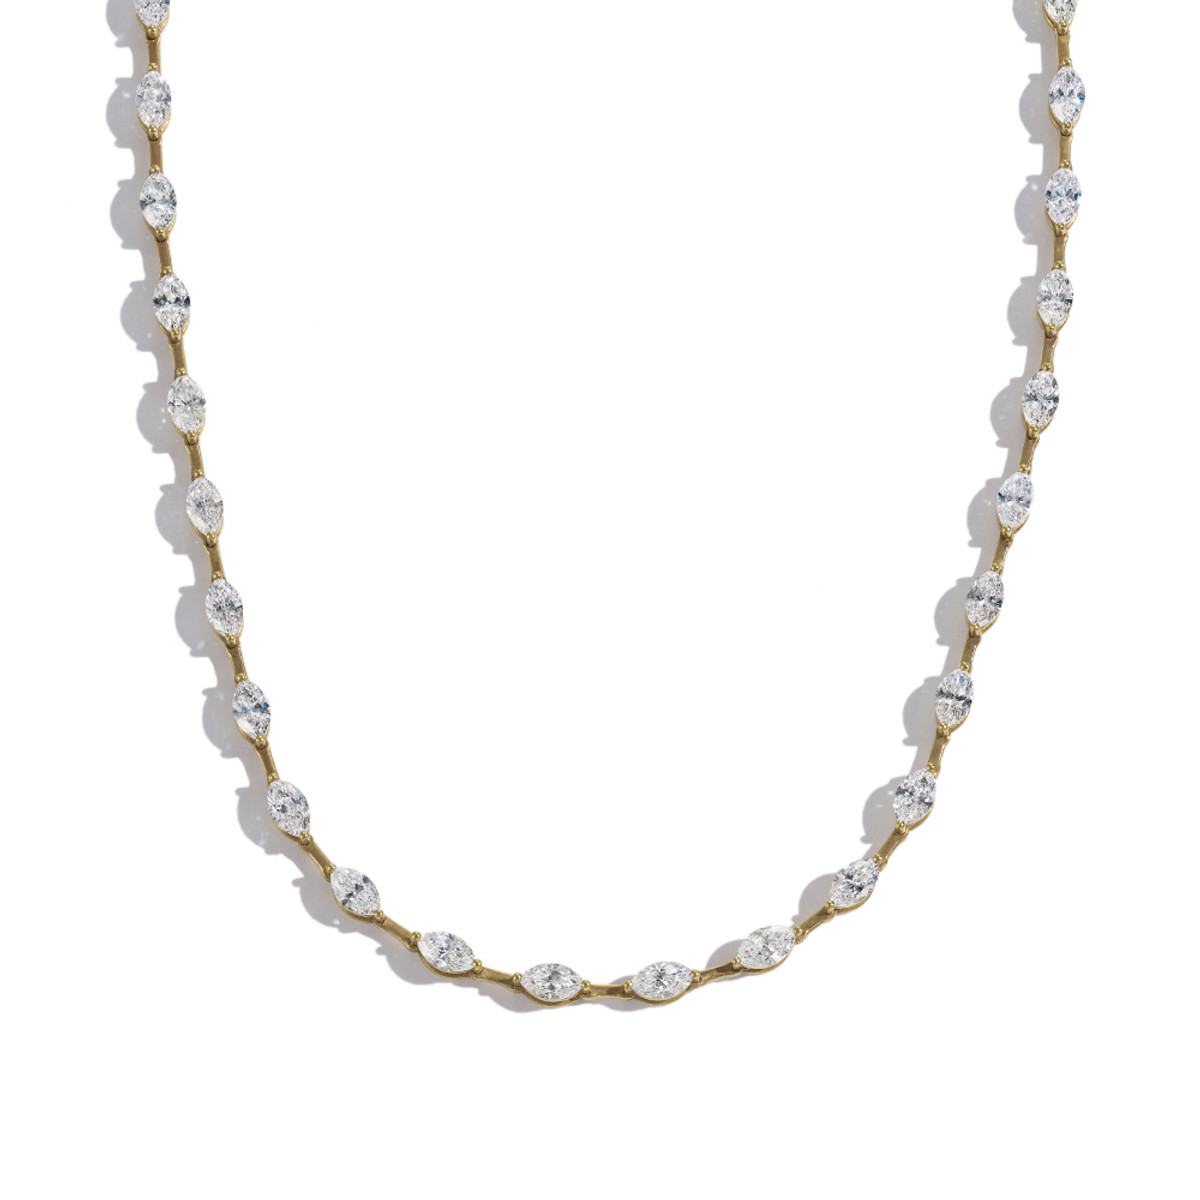 Hyde Park 18k Yellow Gold 26 6.19ct Pear Diamond Necklace-49135 Product Image